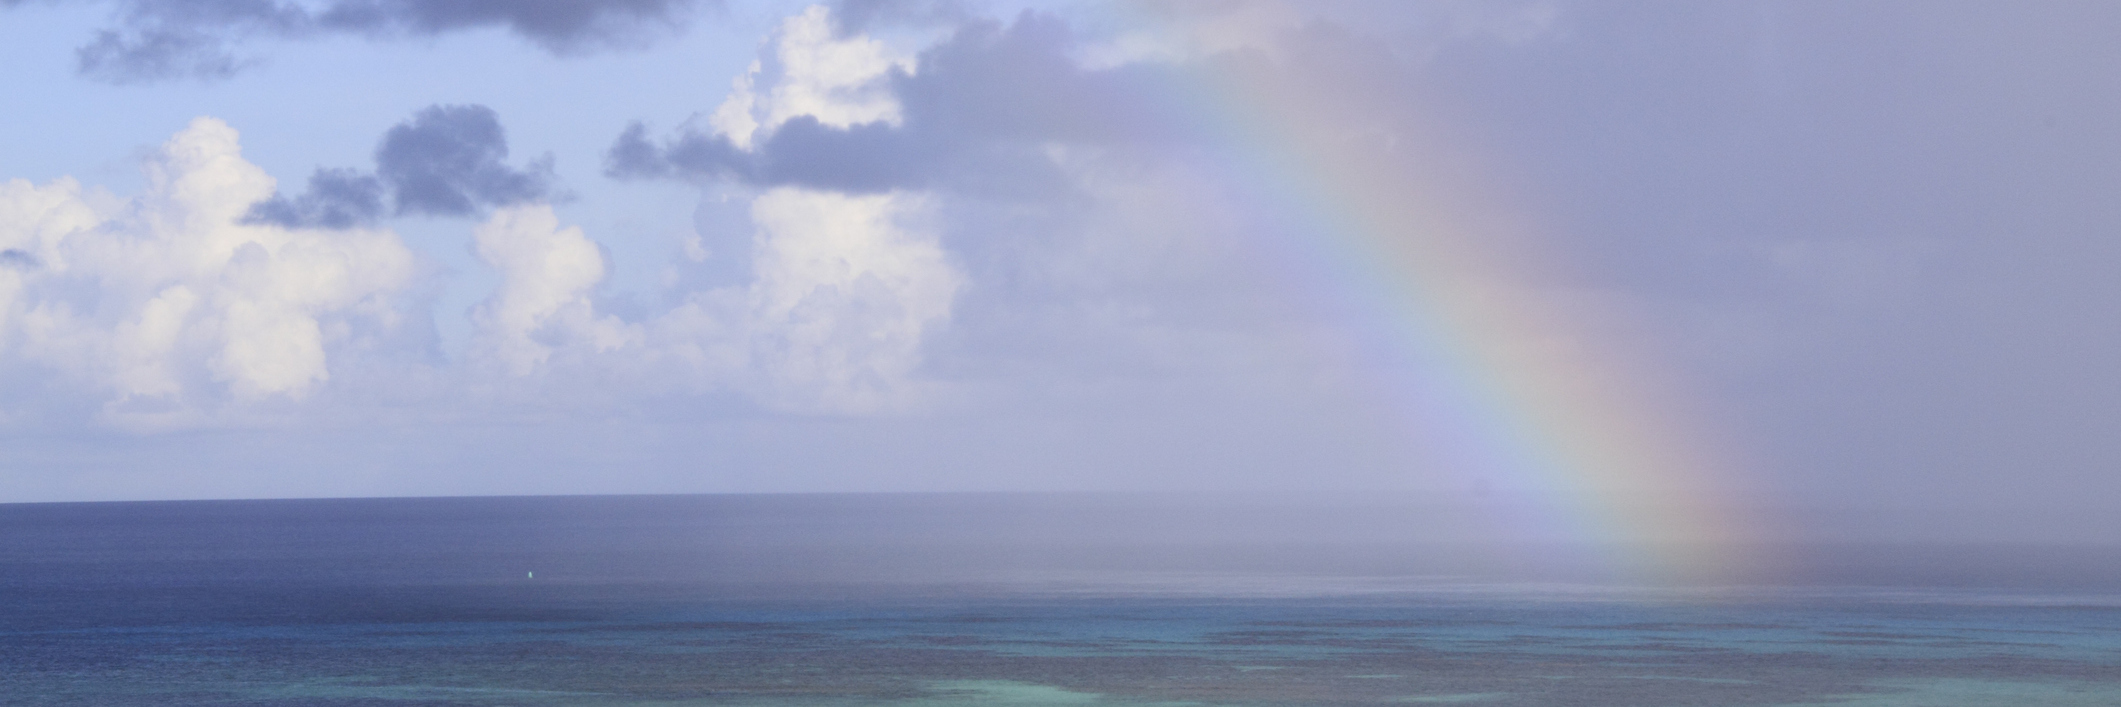 rainbow over the ocean after a storm